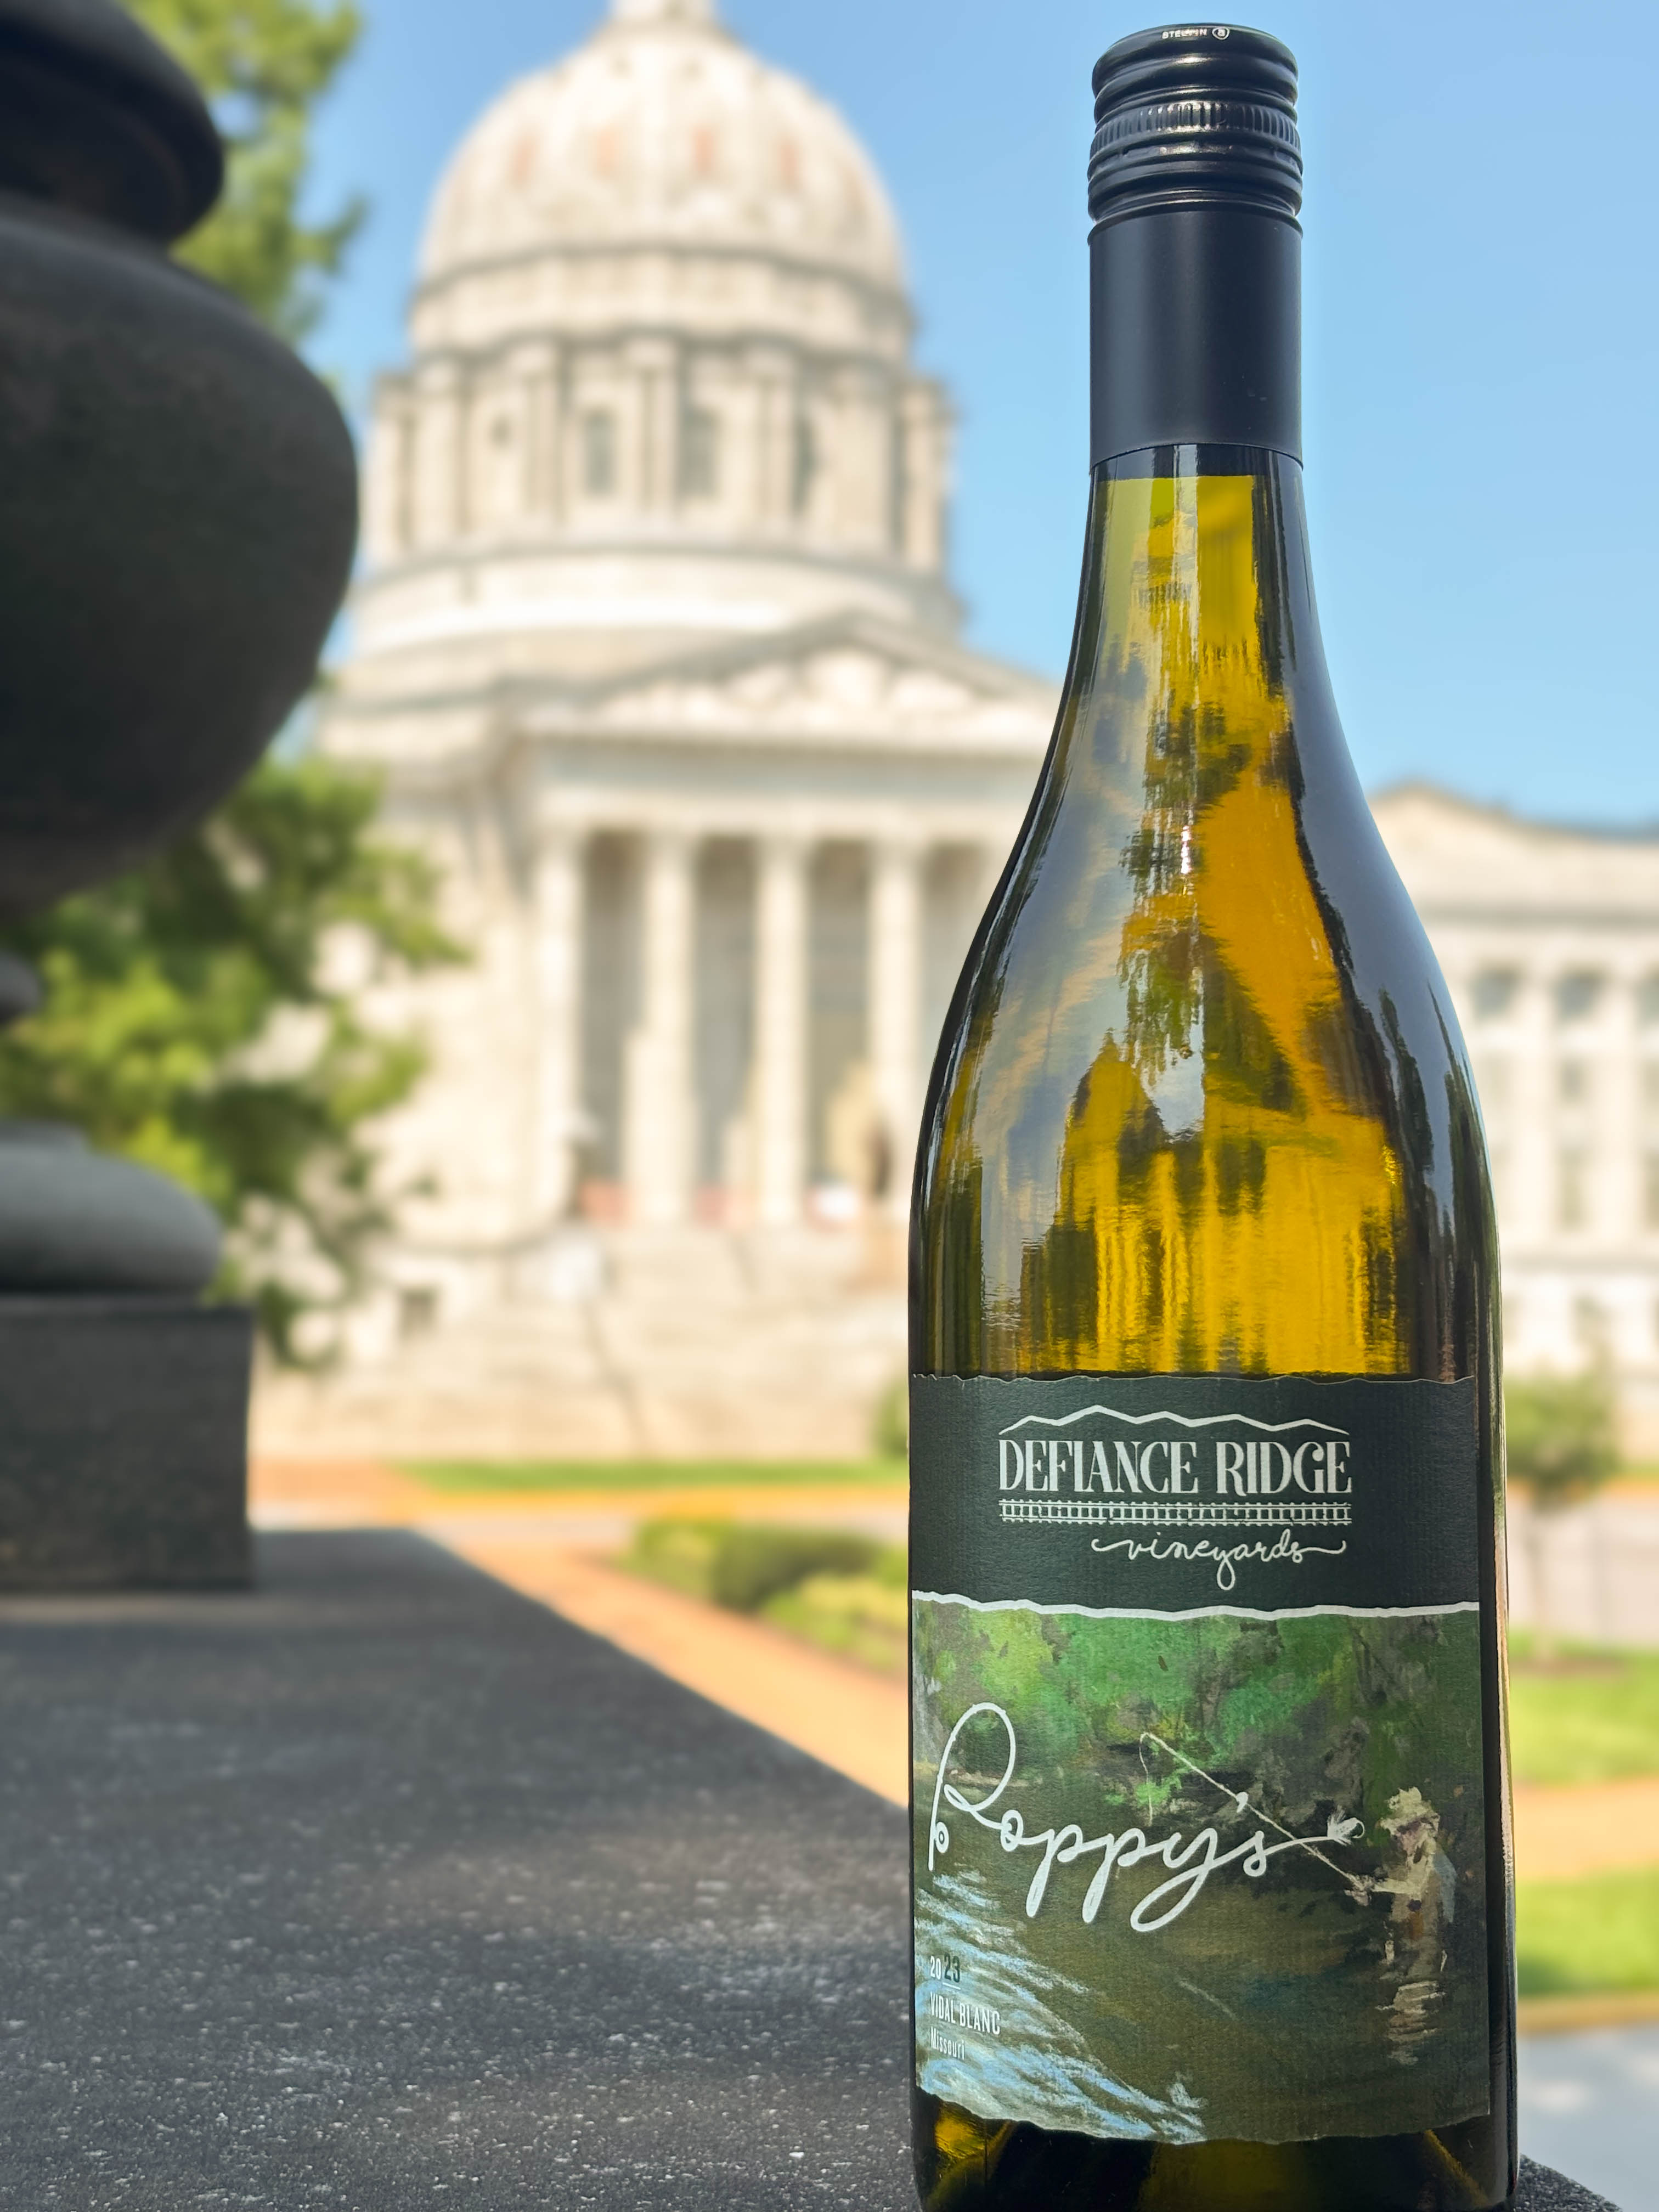 Wine bottle sitting on ledge in front of capital